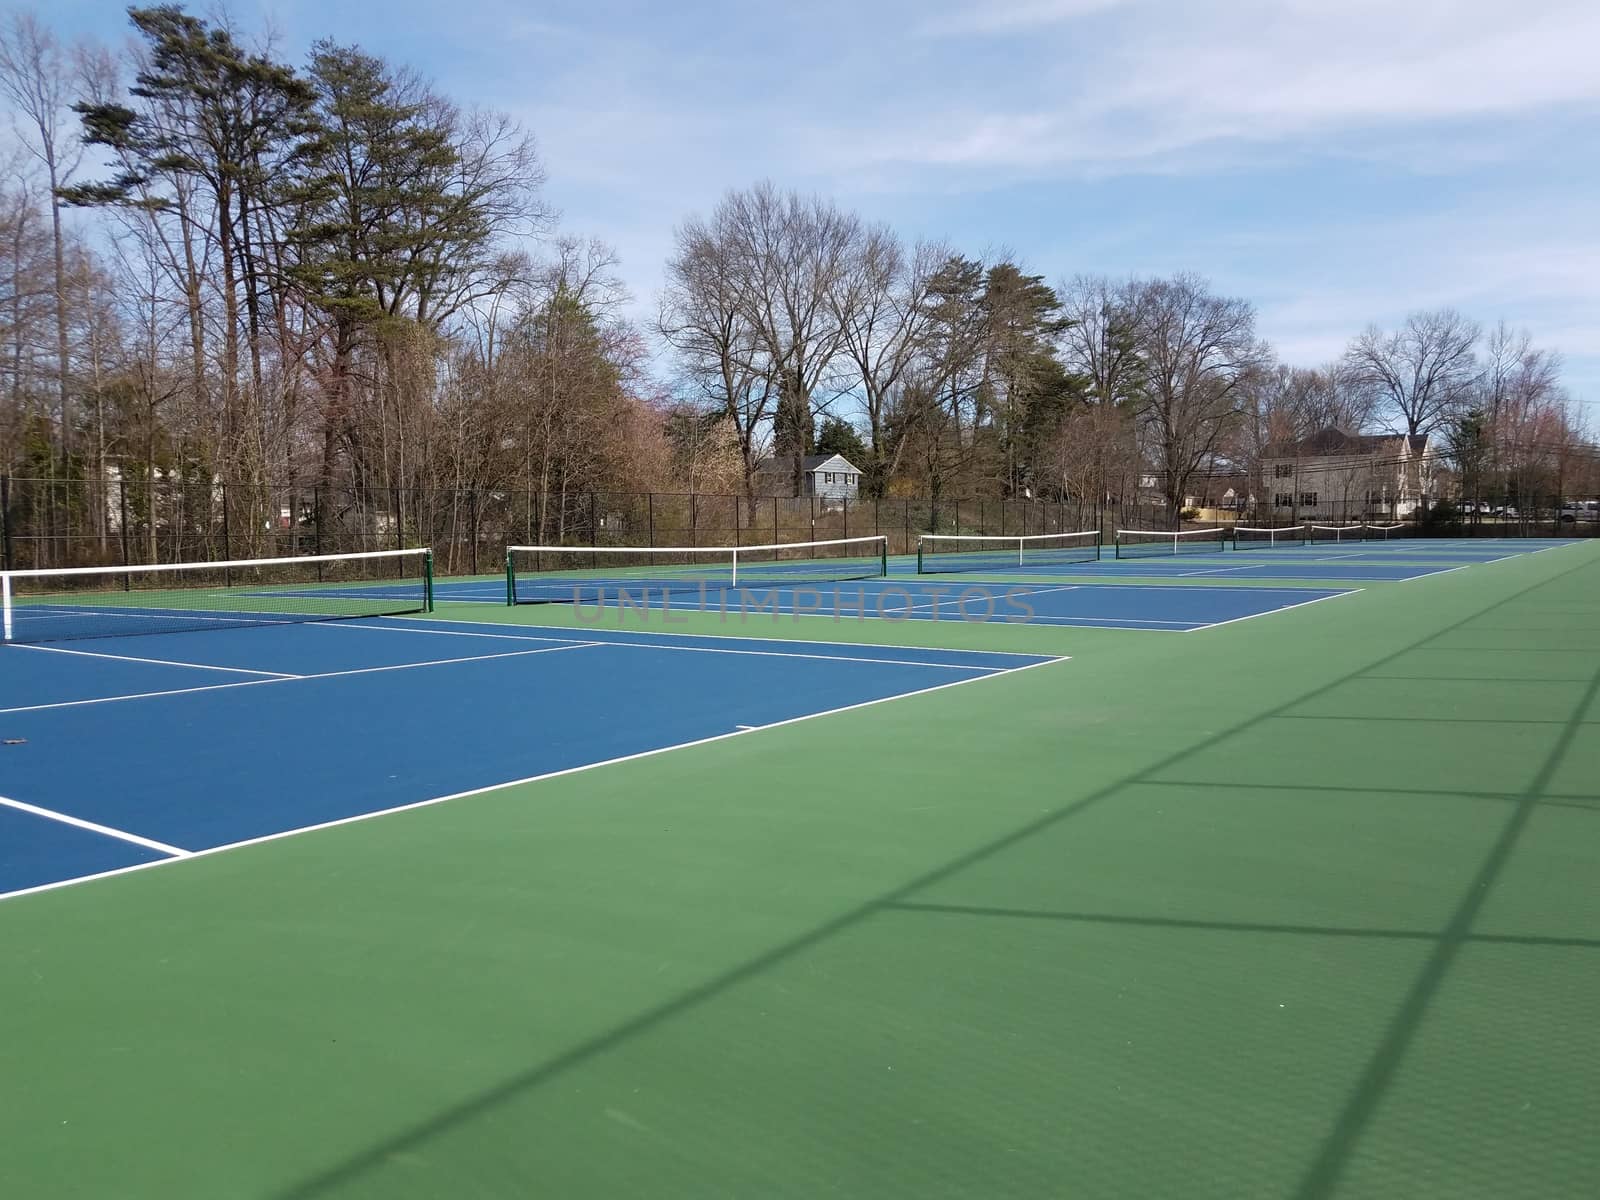 green and blue surface tennis courts with net by stockphotofan1